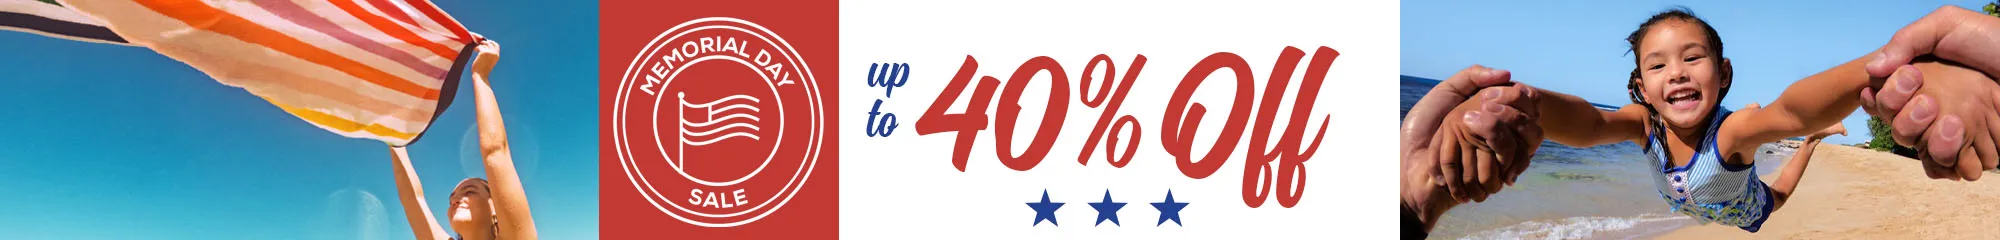 Memorial Day Sale save up to 40% Off